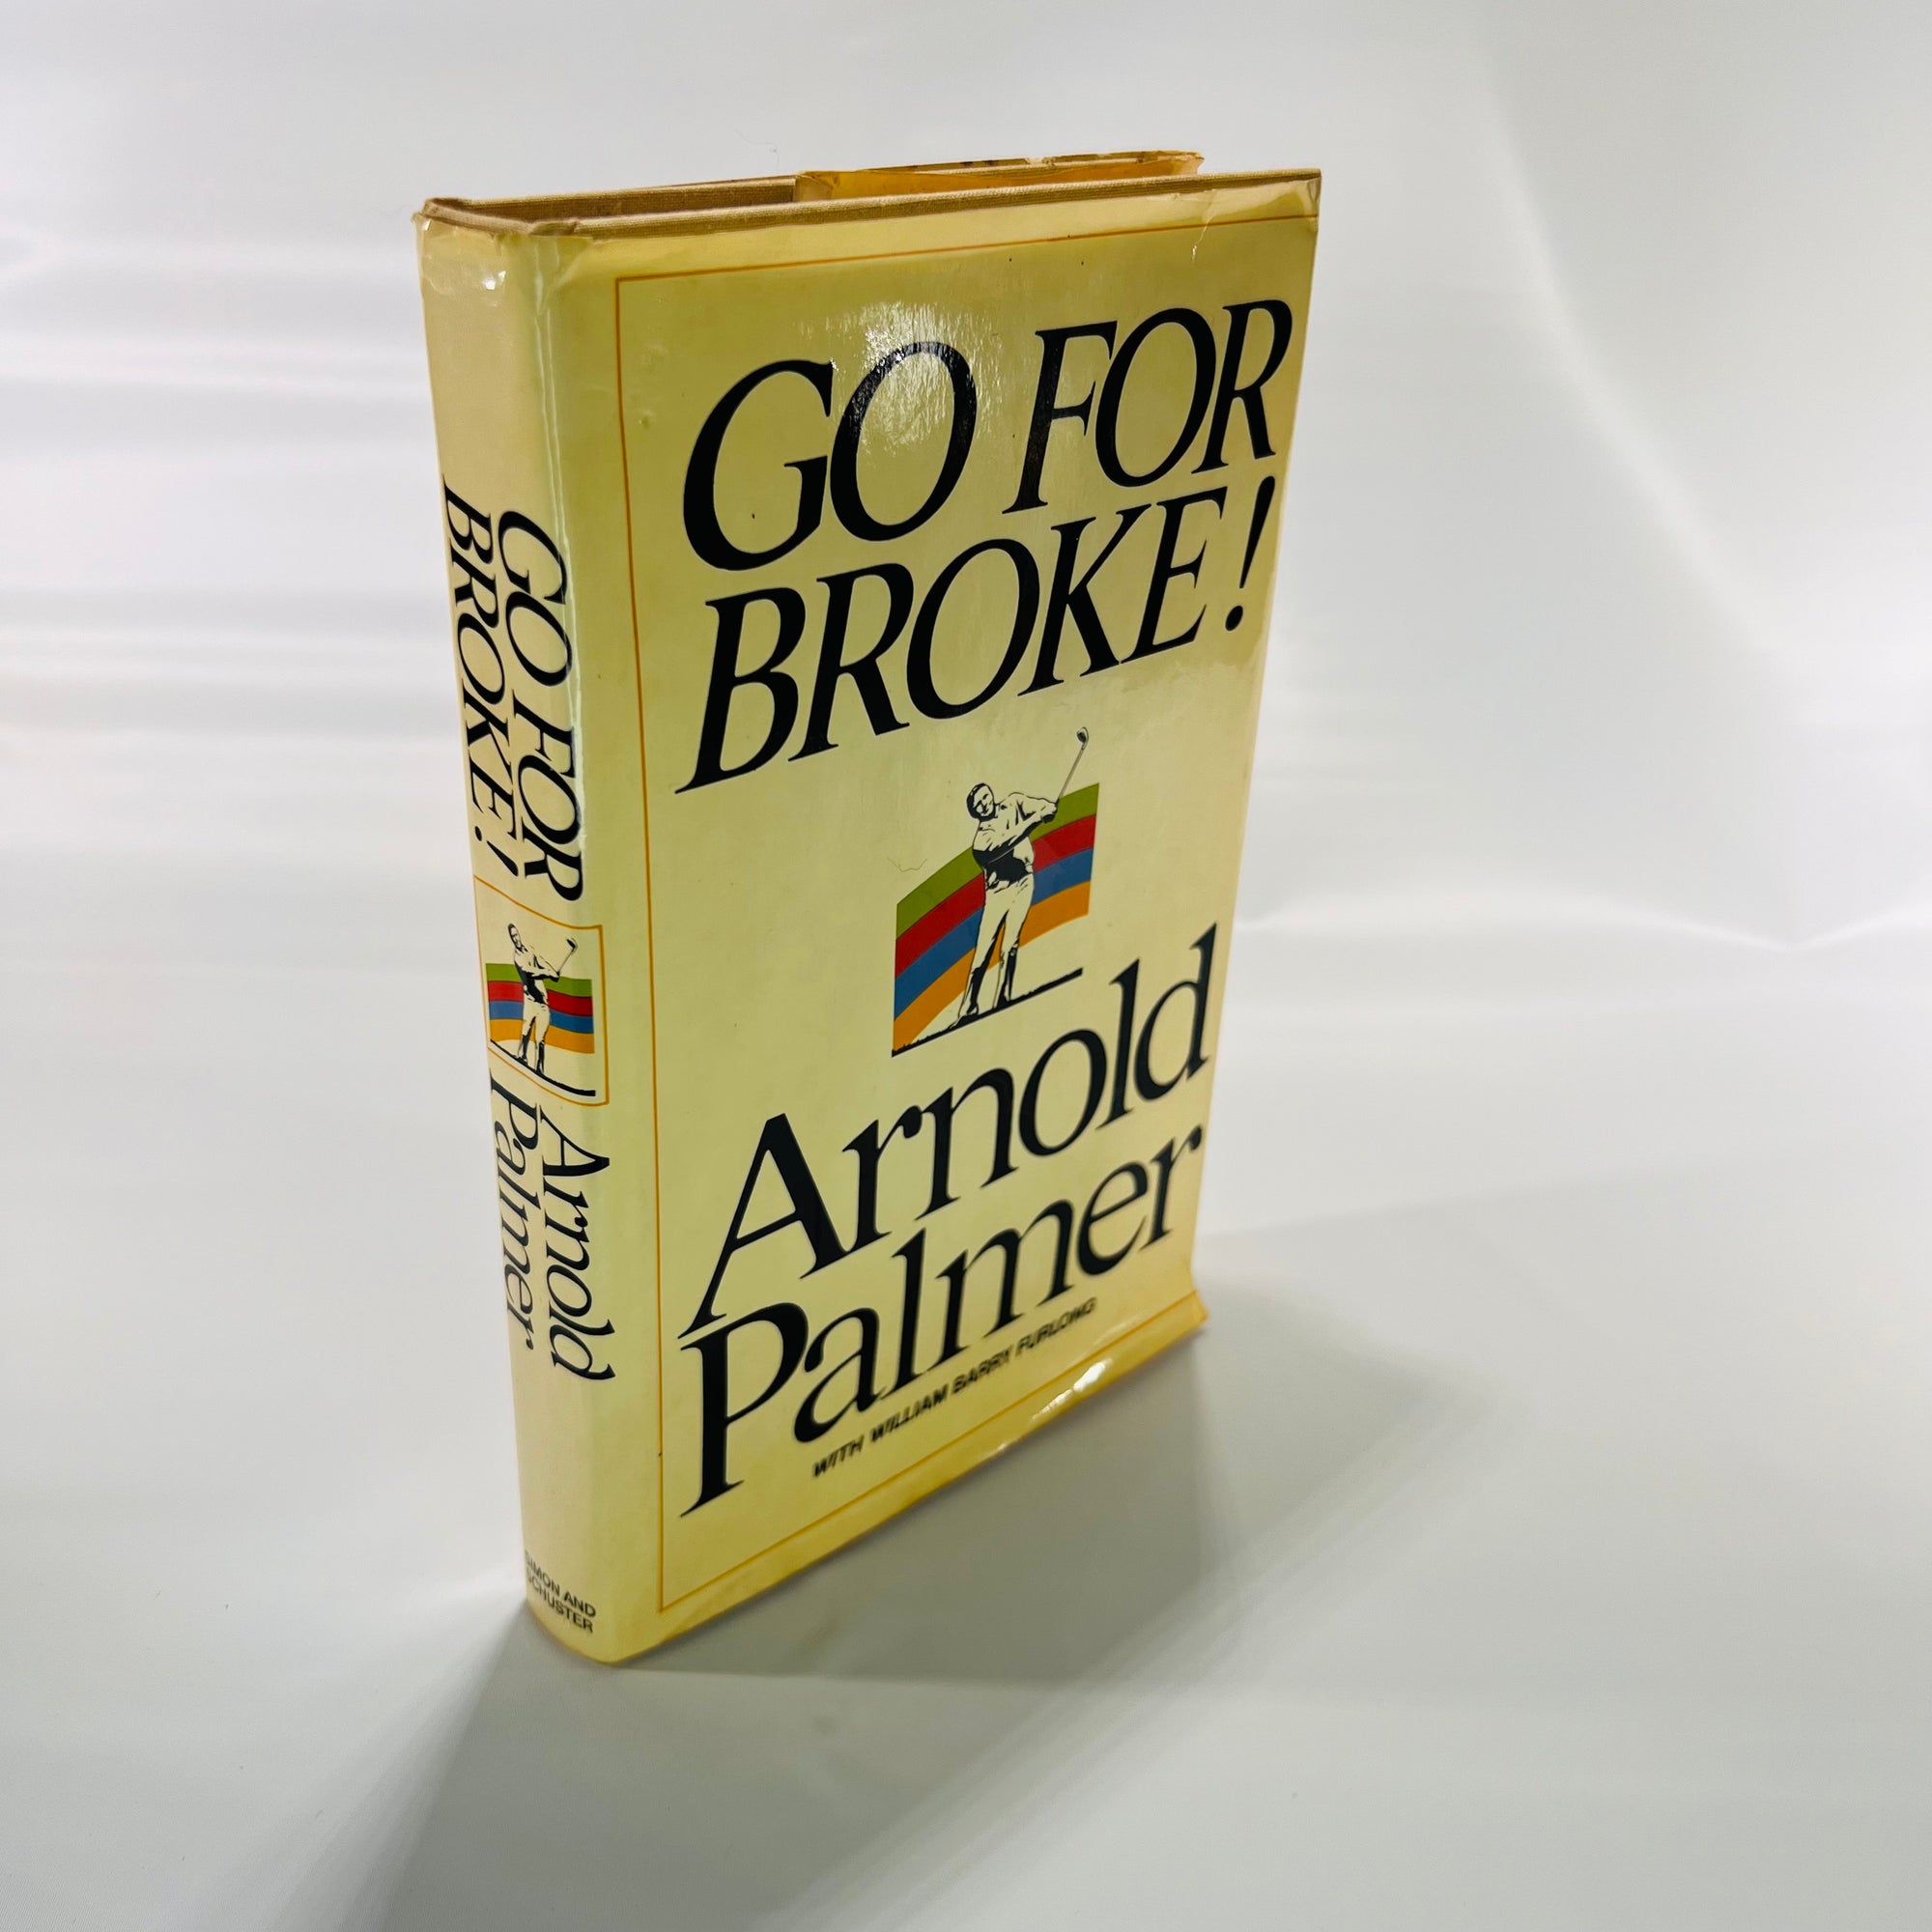 Go For Broke by Arnold Palmer with William Furlong 1973 Simon and Schuster